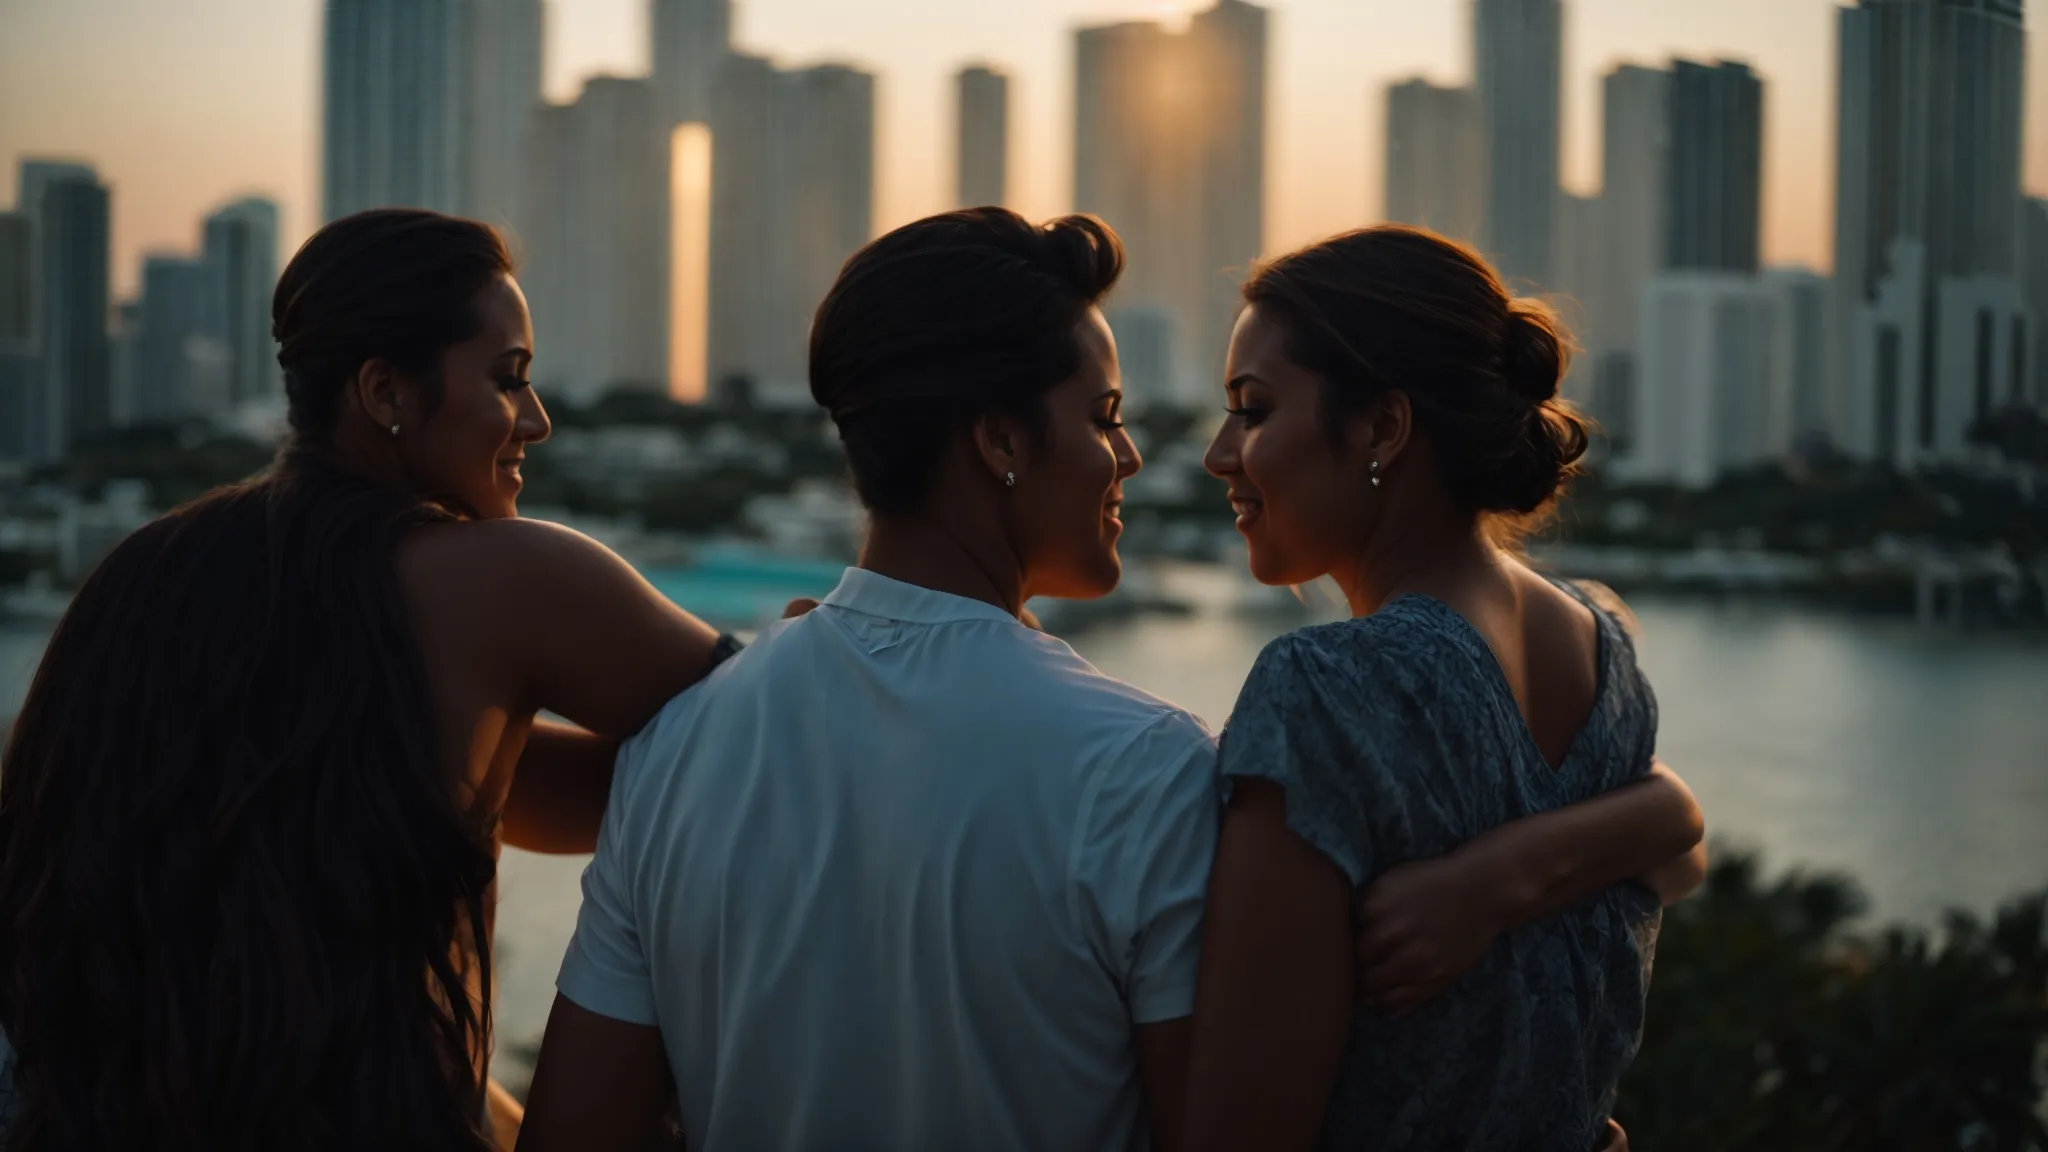 a miami skyline with silhouettes of people embracing in a celebratory or supportive manner.